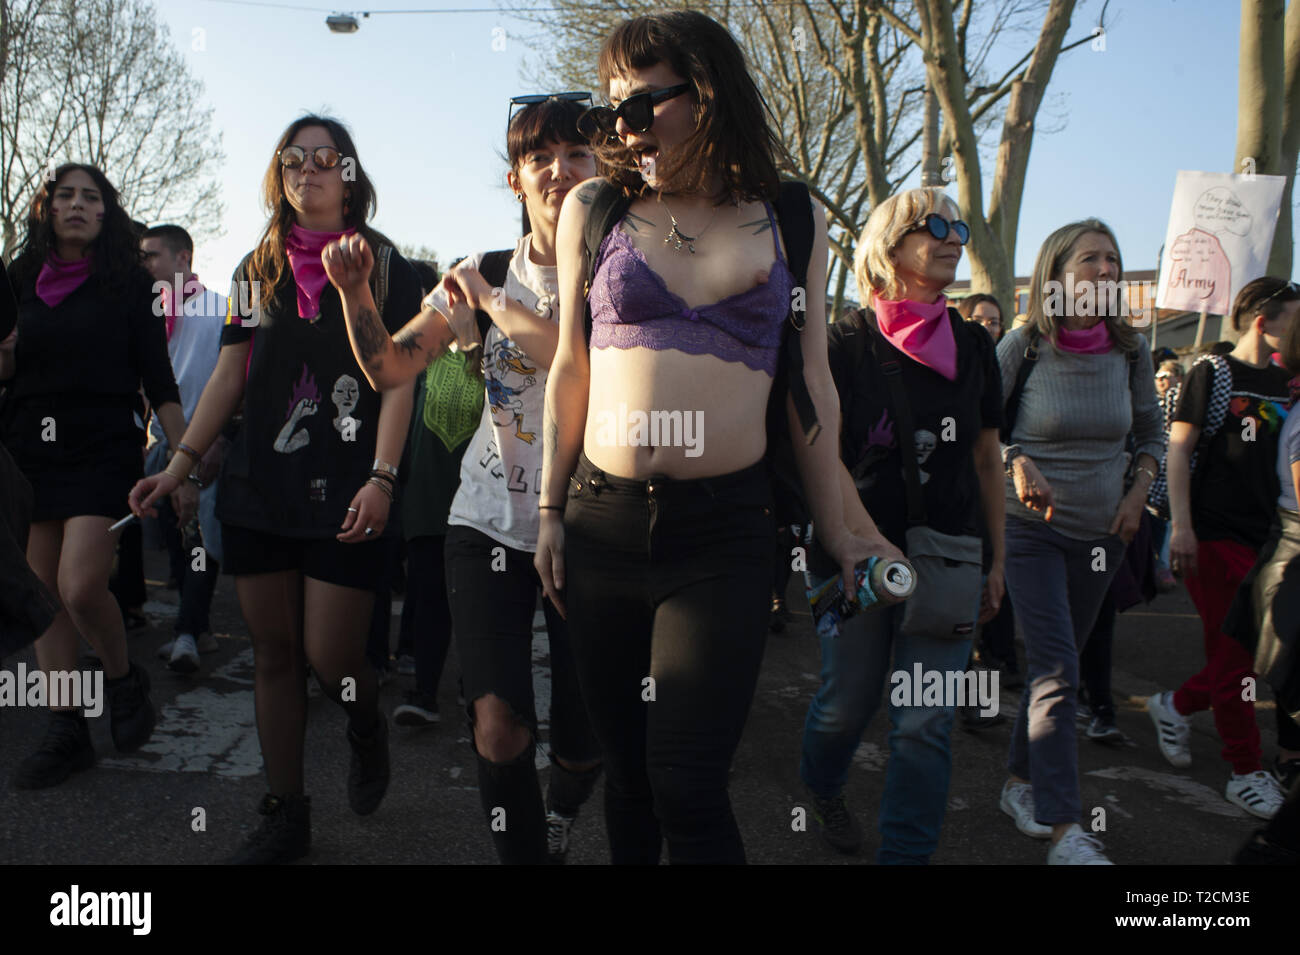 Verona, Veneto, Italy. 30th Mar, 2019. Women seen moving along the streets during the protest.The Italian Women organization Non Una di Meno called for a march against the thirteenth 'World Congress of Families'' (WCF) in Verona. The WCF gathers several representatives of 'pro-life movements'' in Europe and abroad, personalities from the religious world against abortion and it's reportedly connected to far-rights movements. Non Una di Meno and other associations protest against the WCF's positions against abortion, homosexuality and their aims to write a global agenda and politic Stock Photo